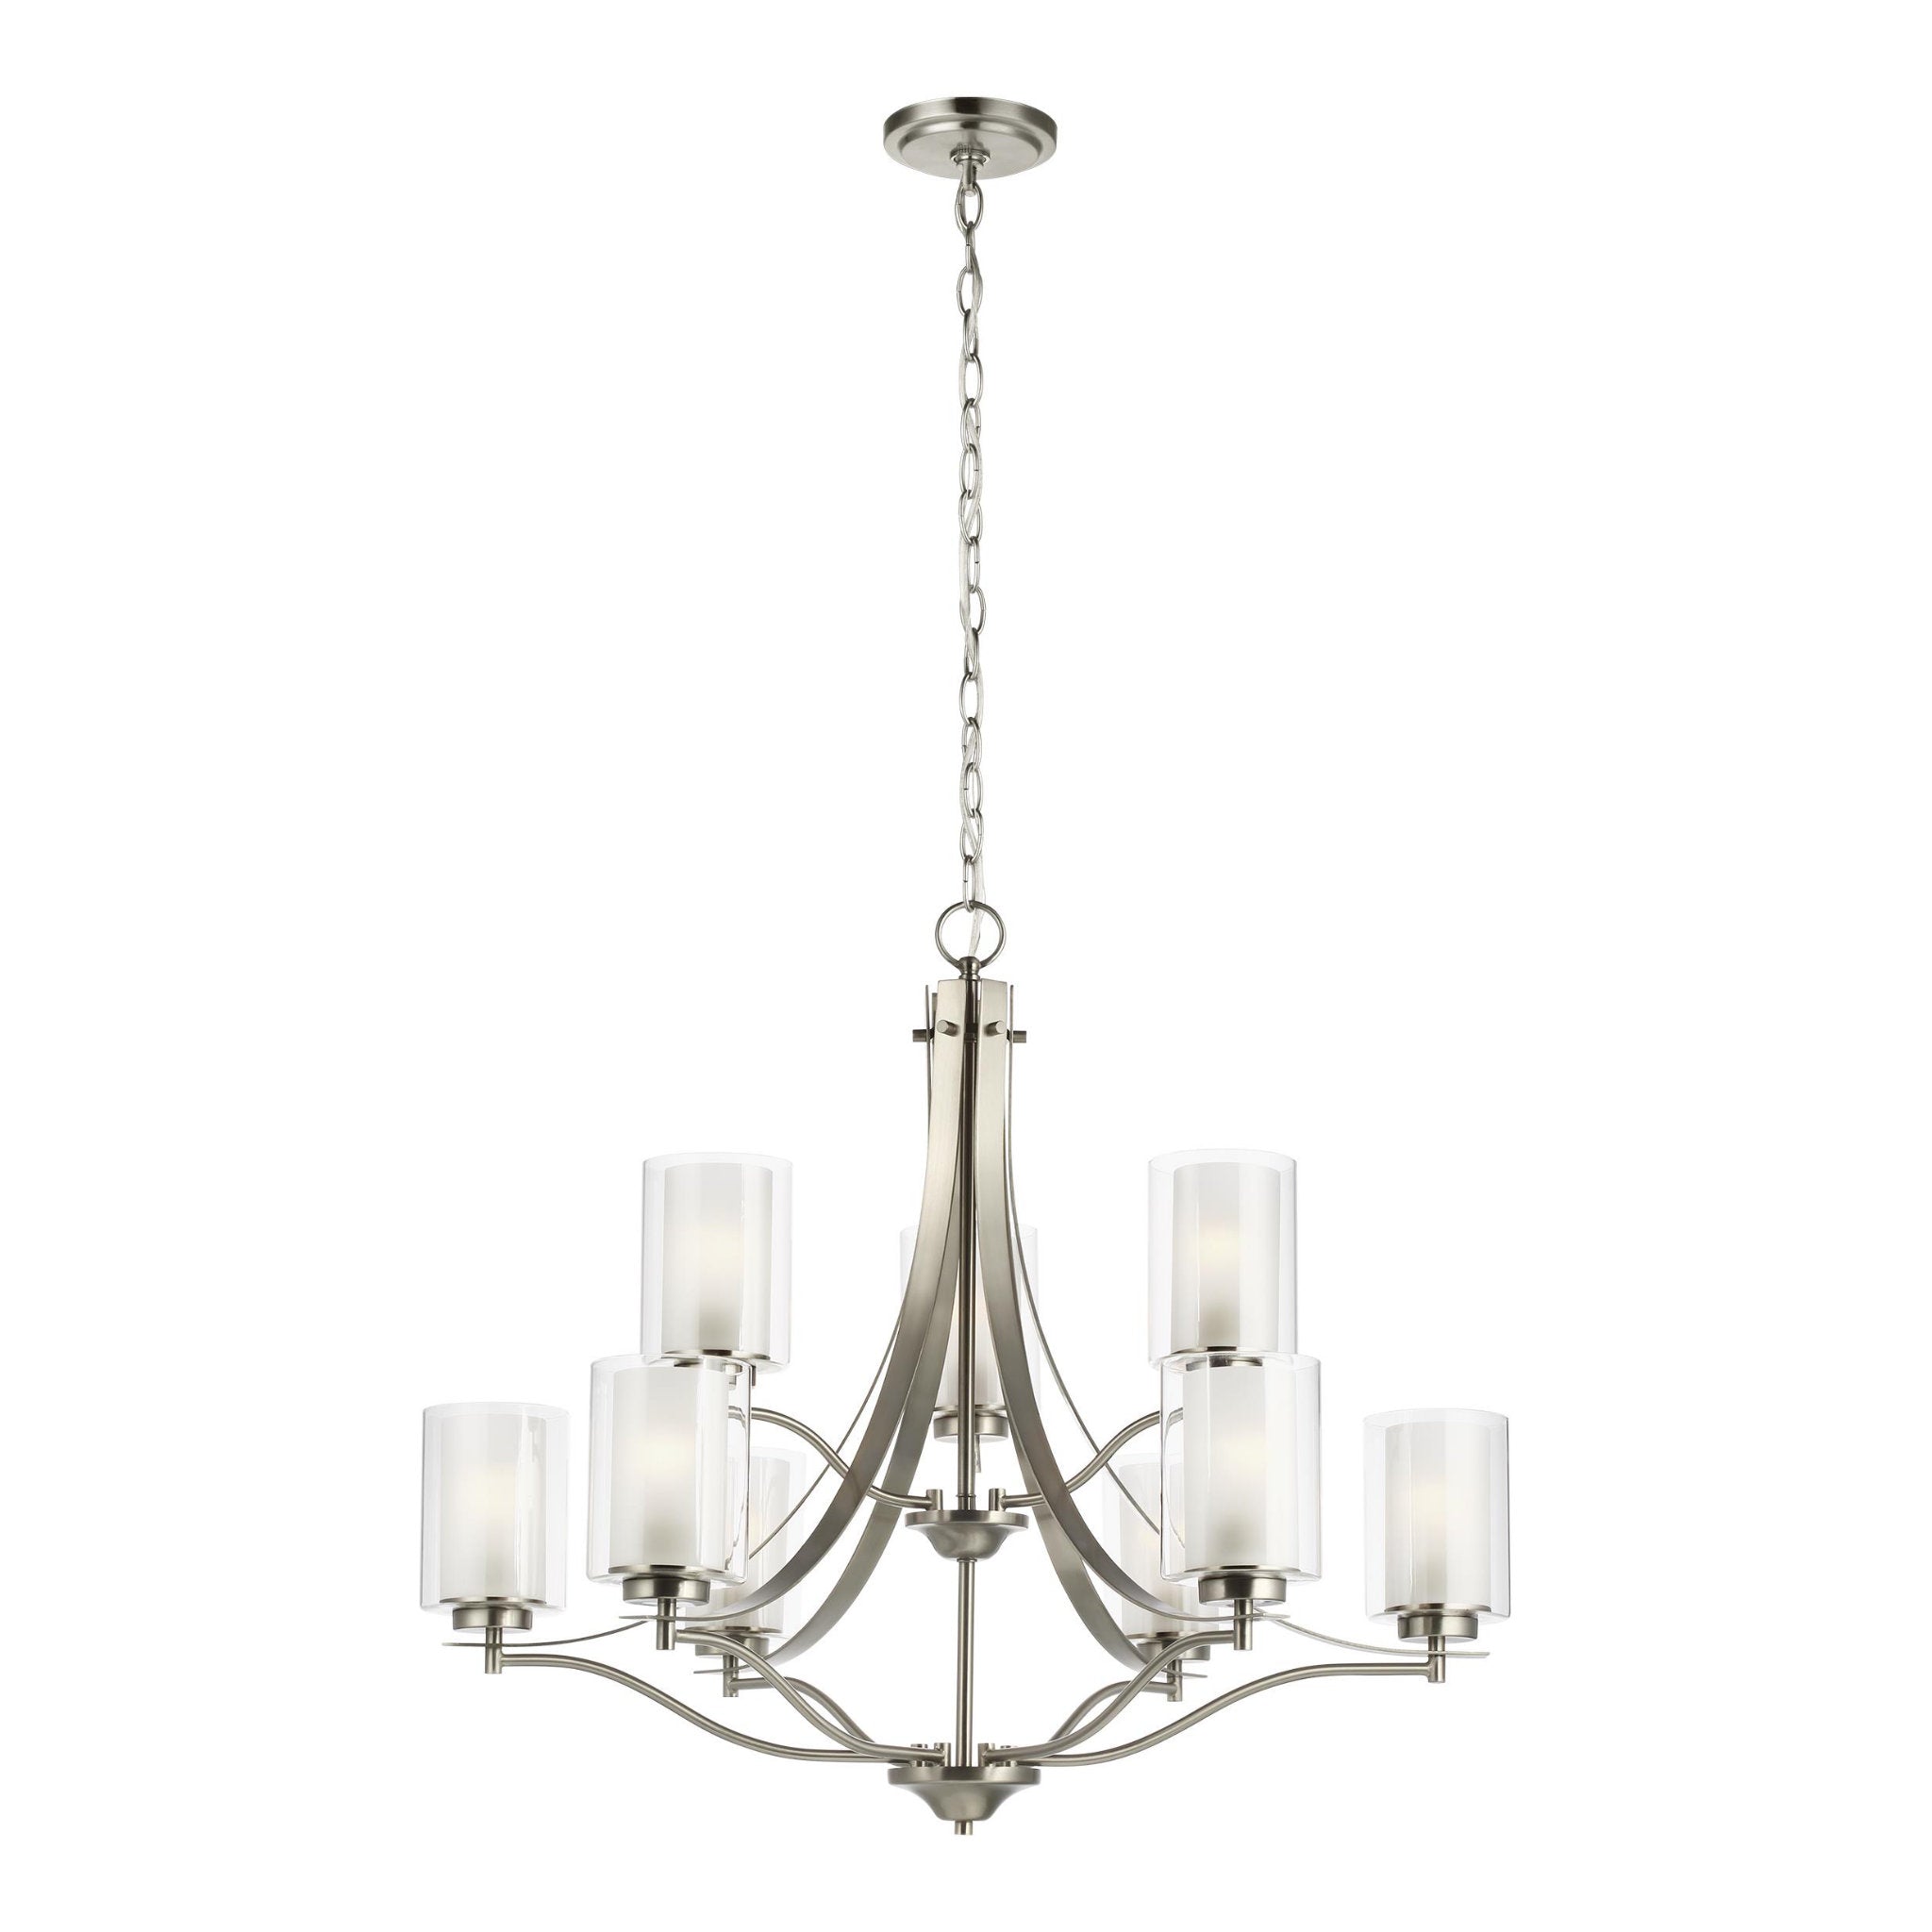 Elmwood Park Nine Light Chandelier Traditional 27.625" Height Steel Round Satin Etched Shade in Brushed Nickel